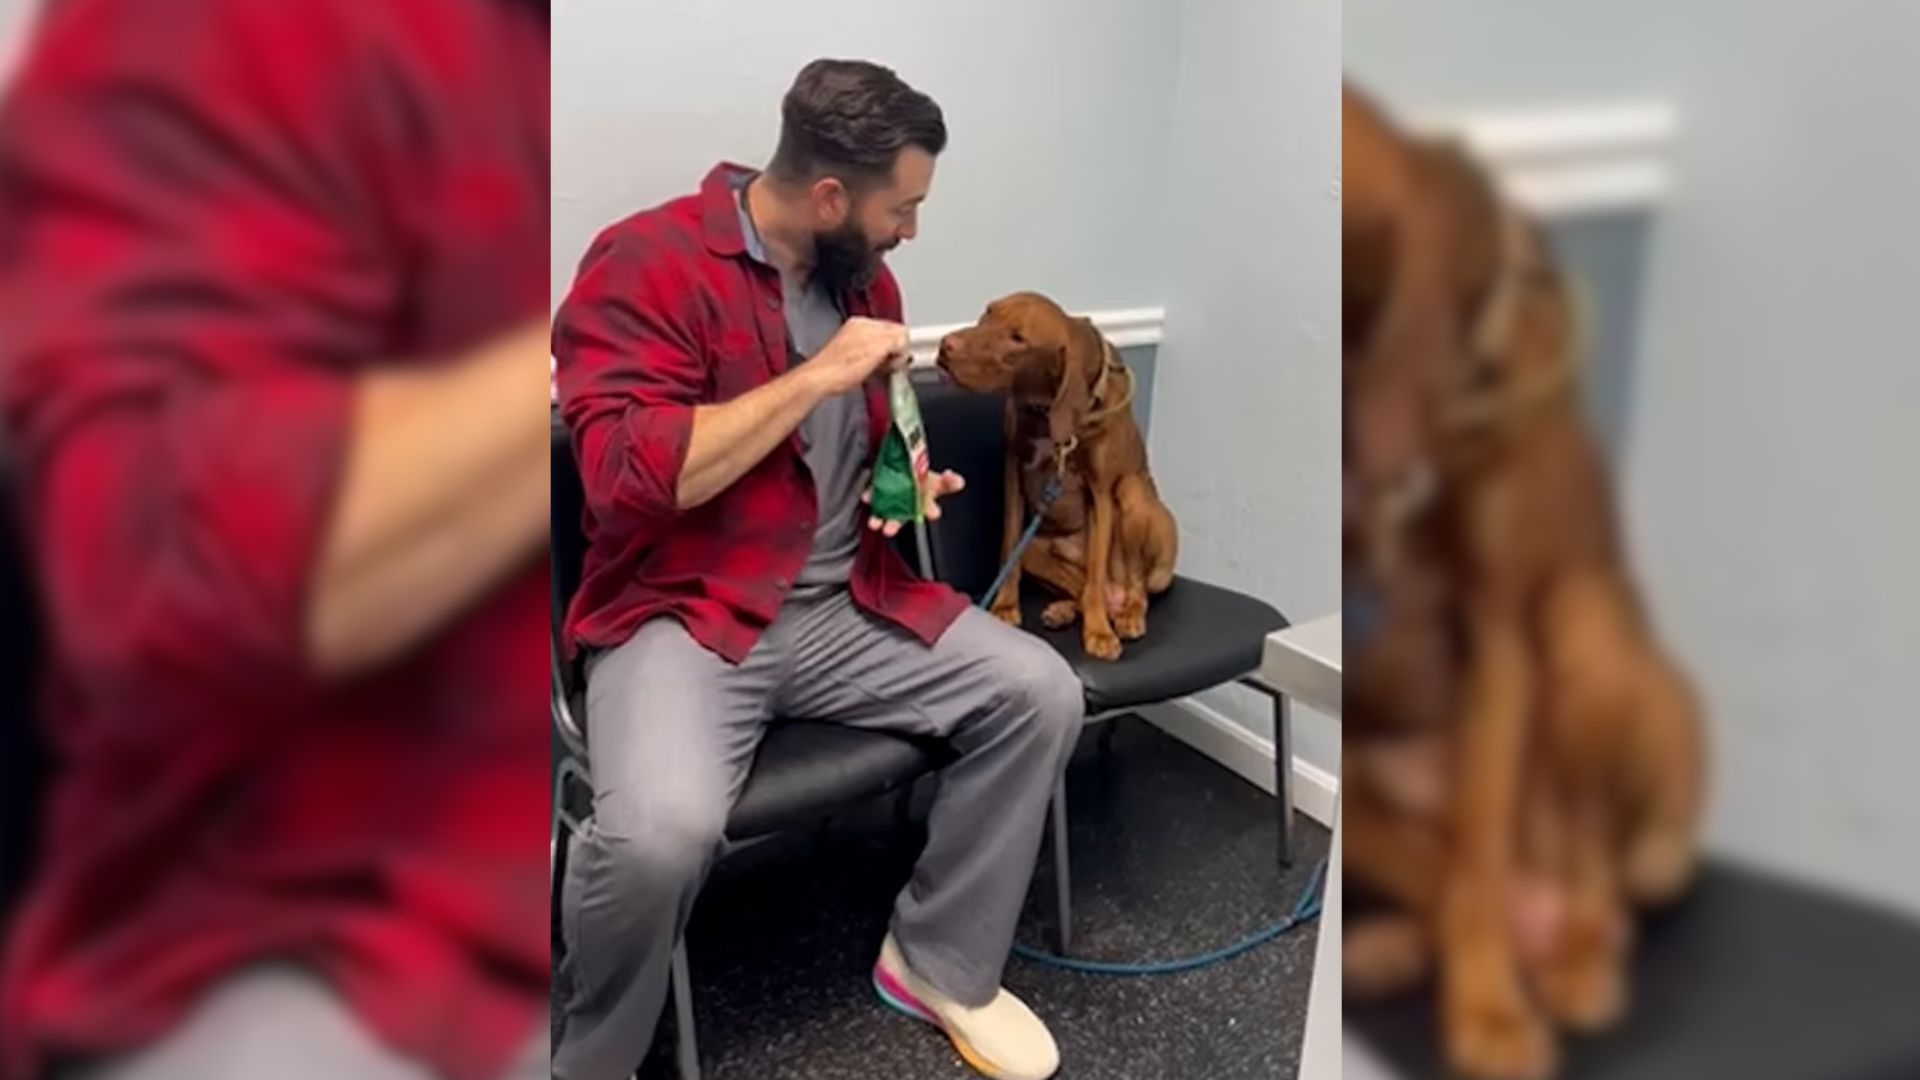 A Vet Calms Down A Pup Before A Visit In A Video That Will Melt Your Heart